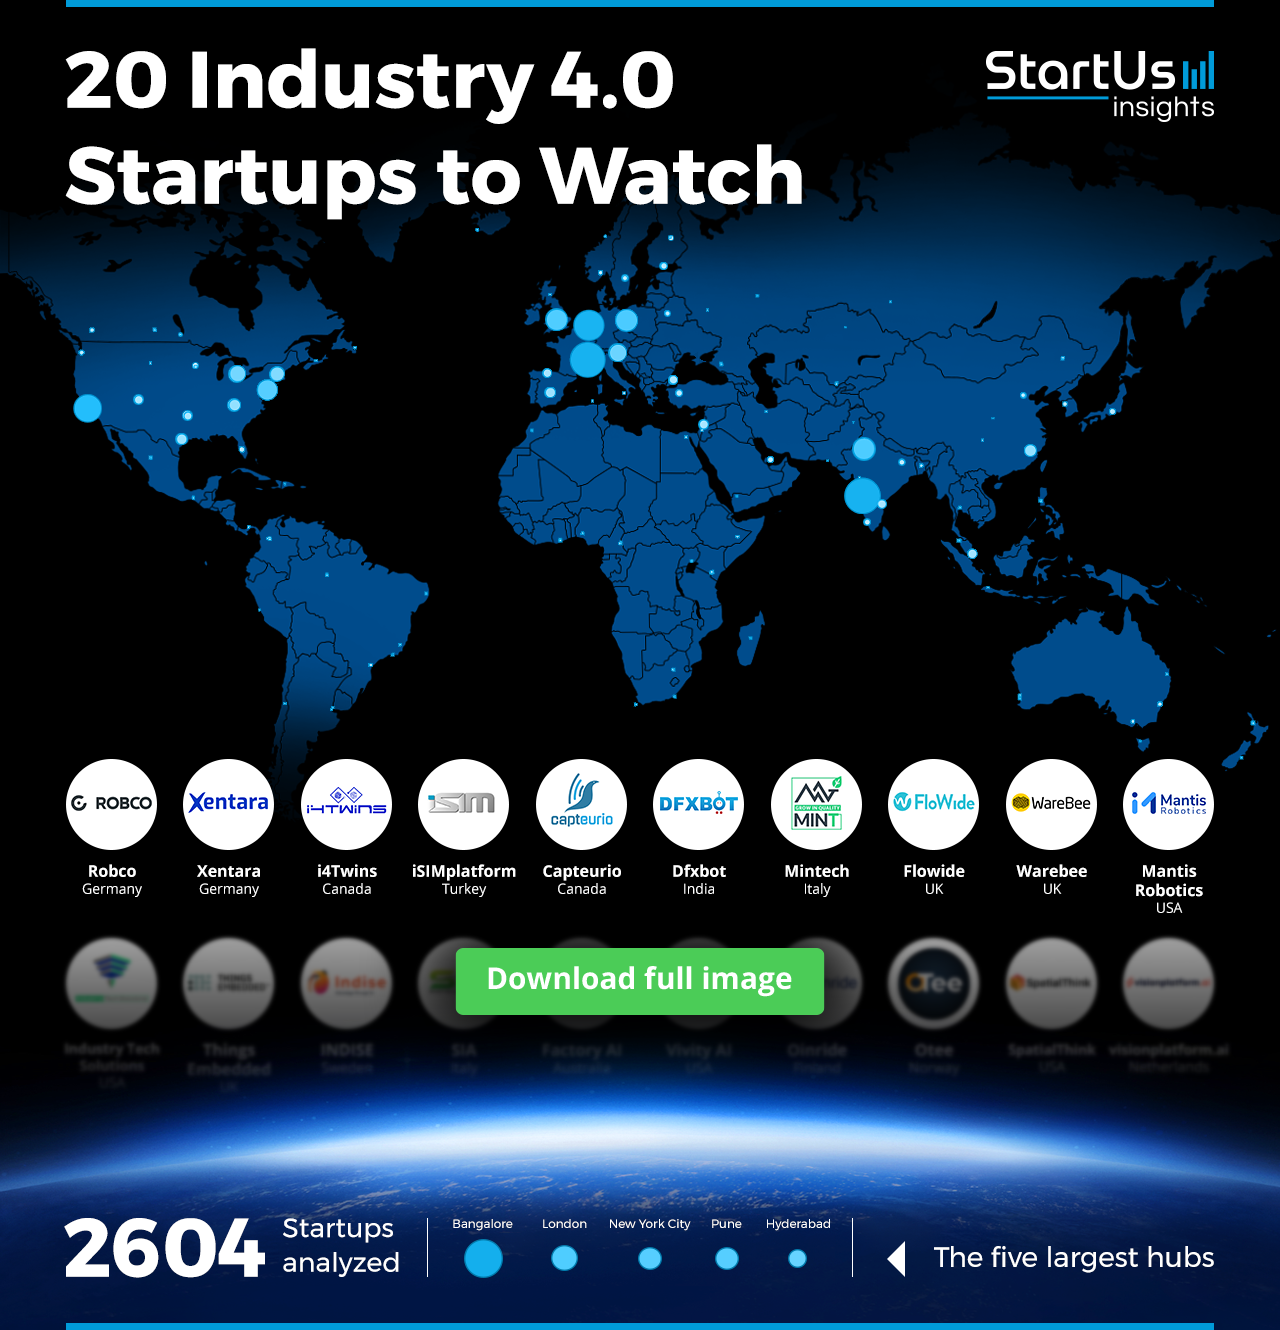 Industry-4.0-Startups-to-Watch-Heat-Map-Blurred-StartUs-Insights-noresize